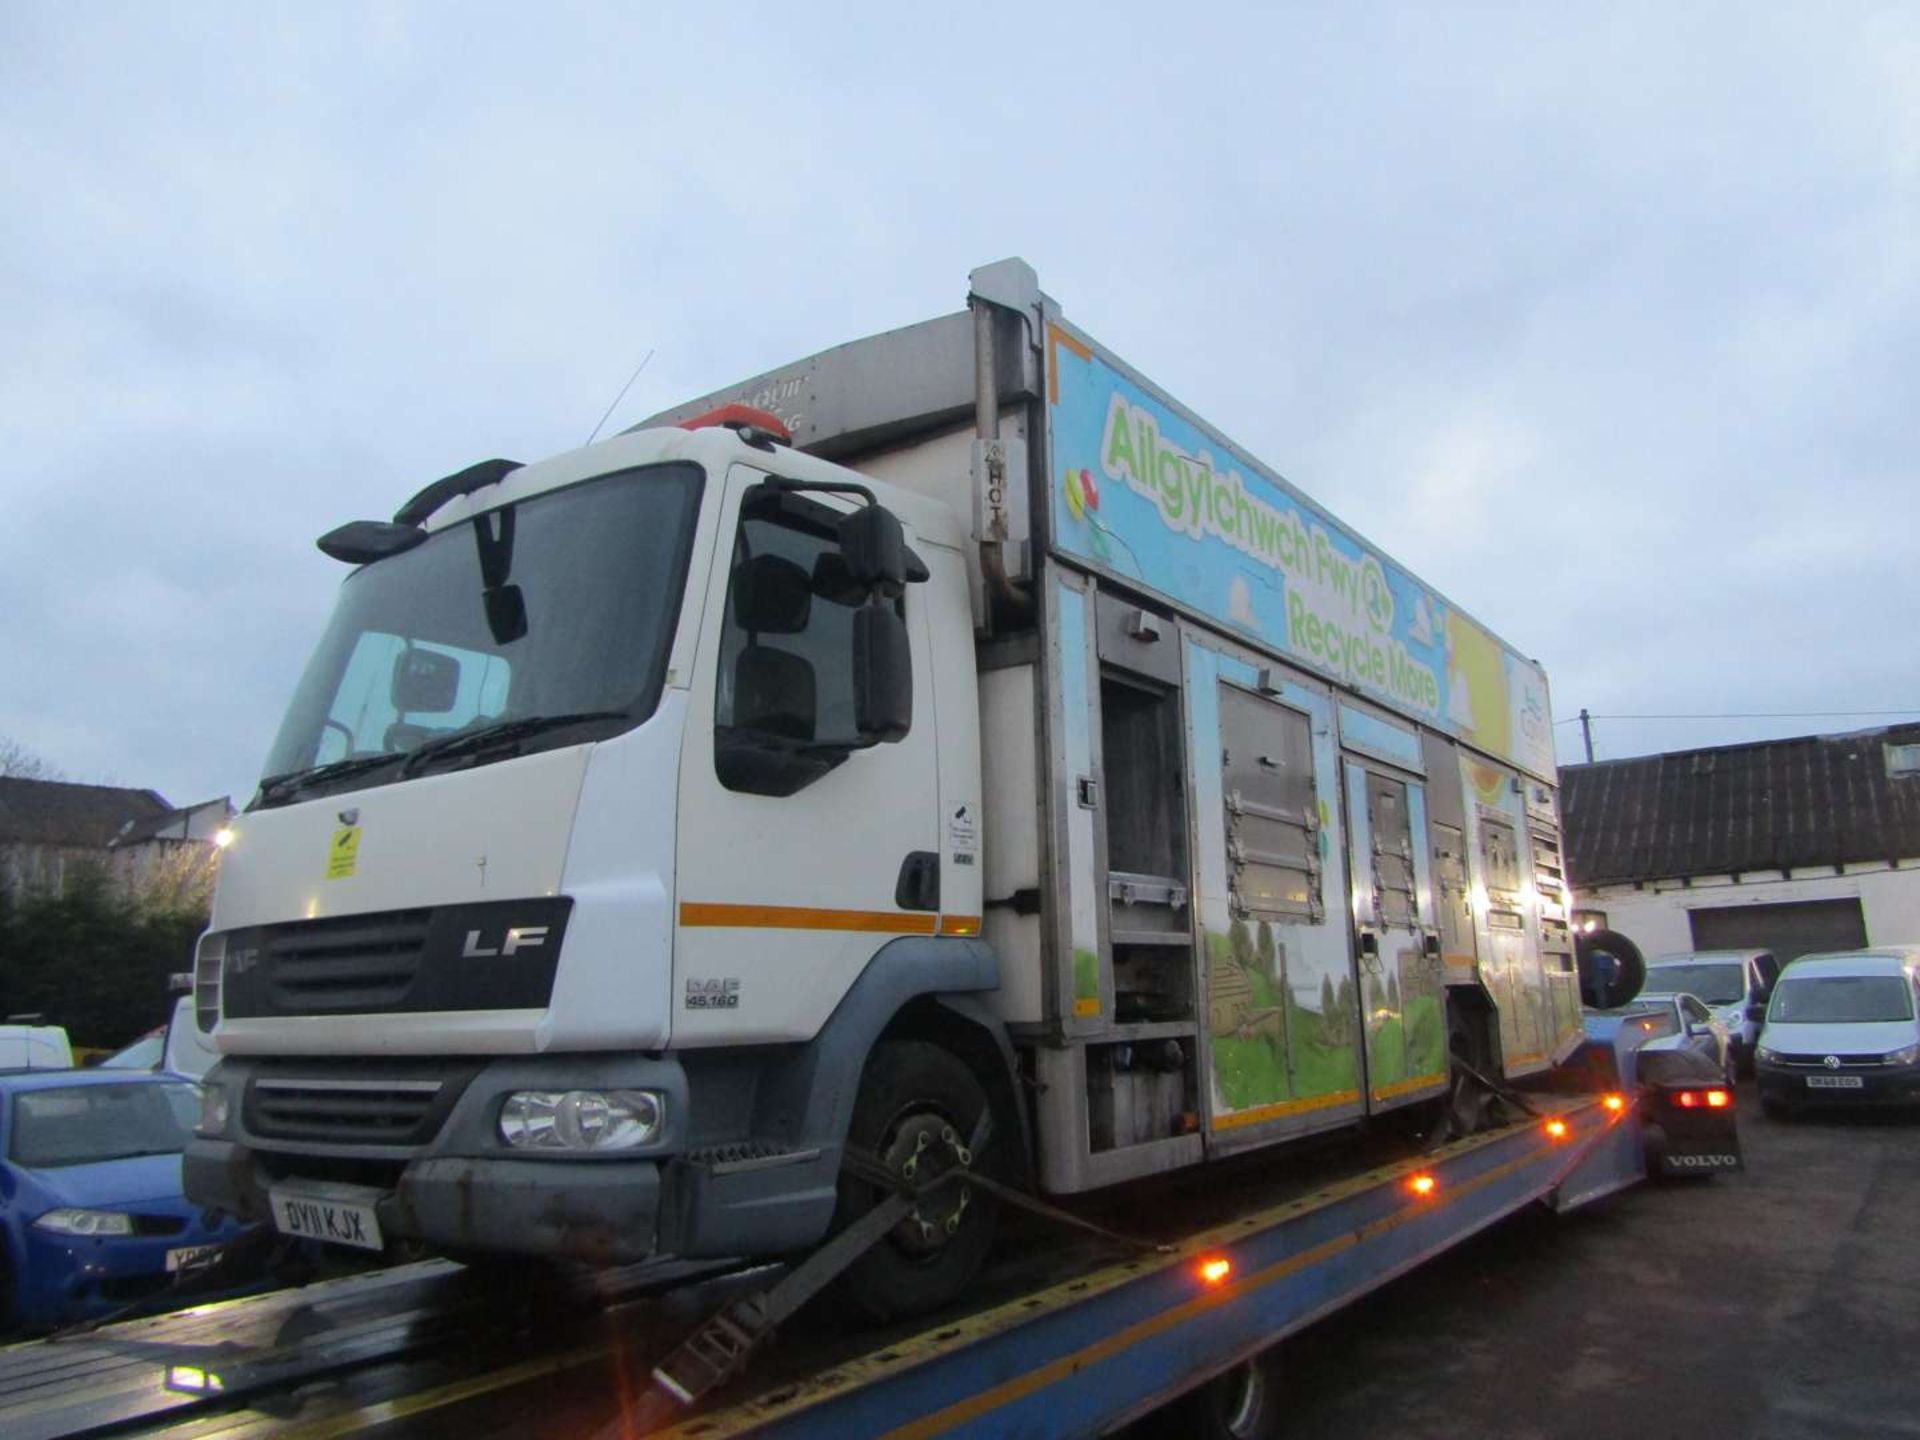 2011 11 reg Leyland DAF FA LF45.160 12 V Recycling vehicle (Non Runner) (Direct Council) - Image 2 of 5